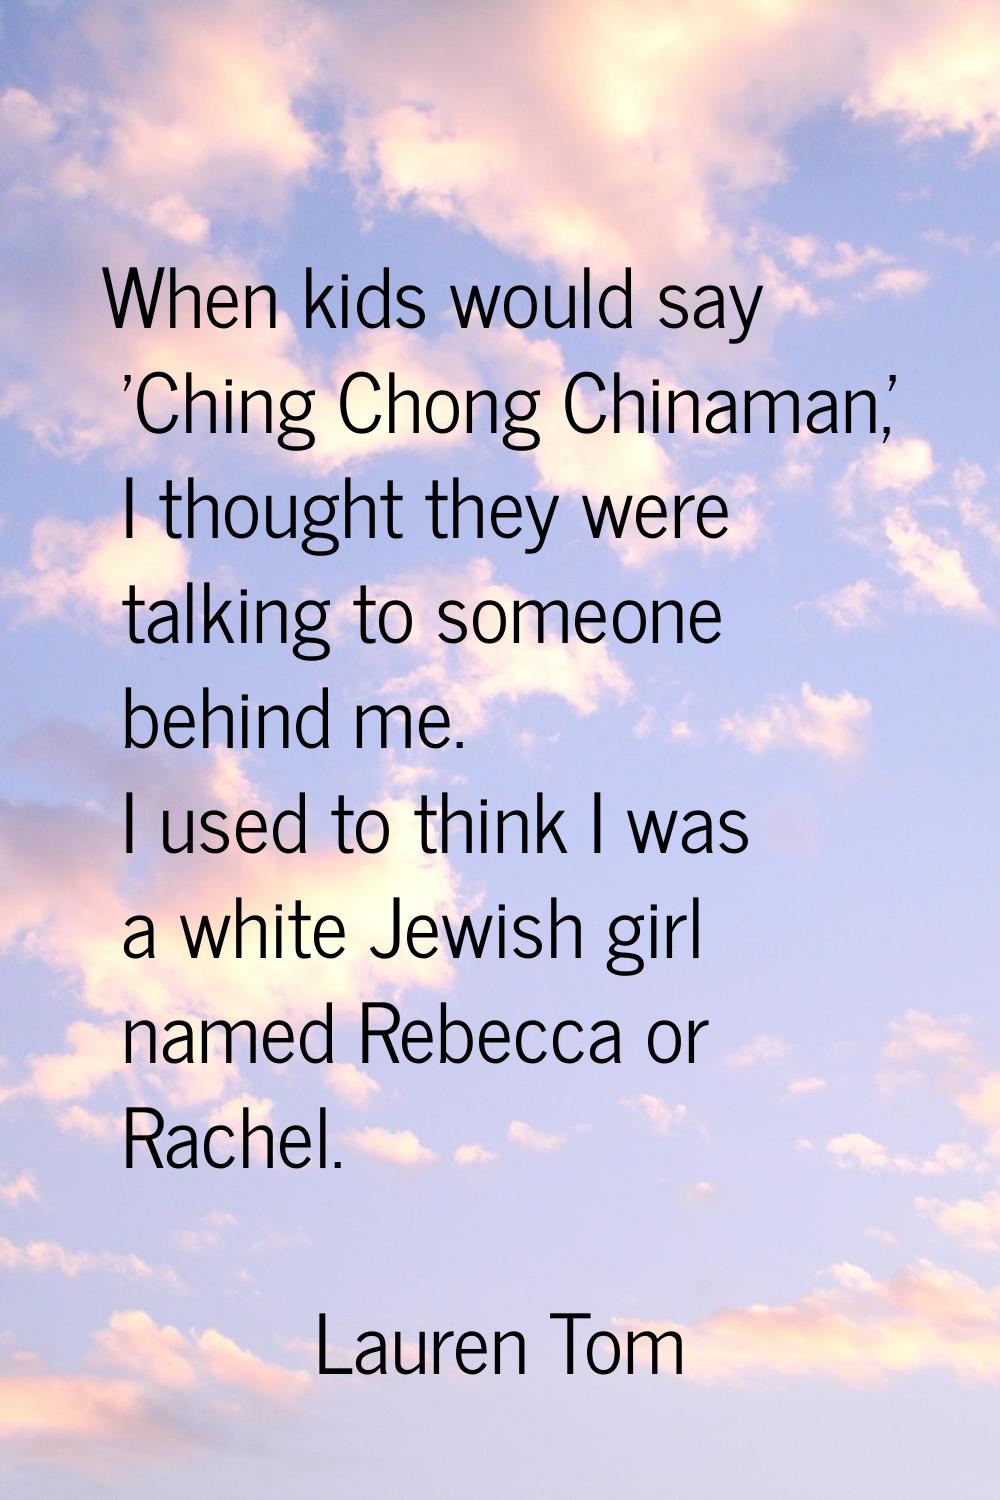 When kids would say 'Ching Chong Chinaman,' I thought they were talking to someone behind me. I use